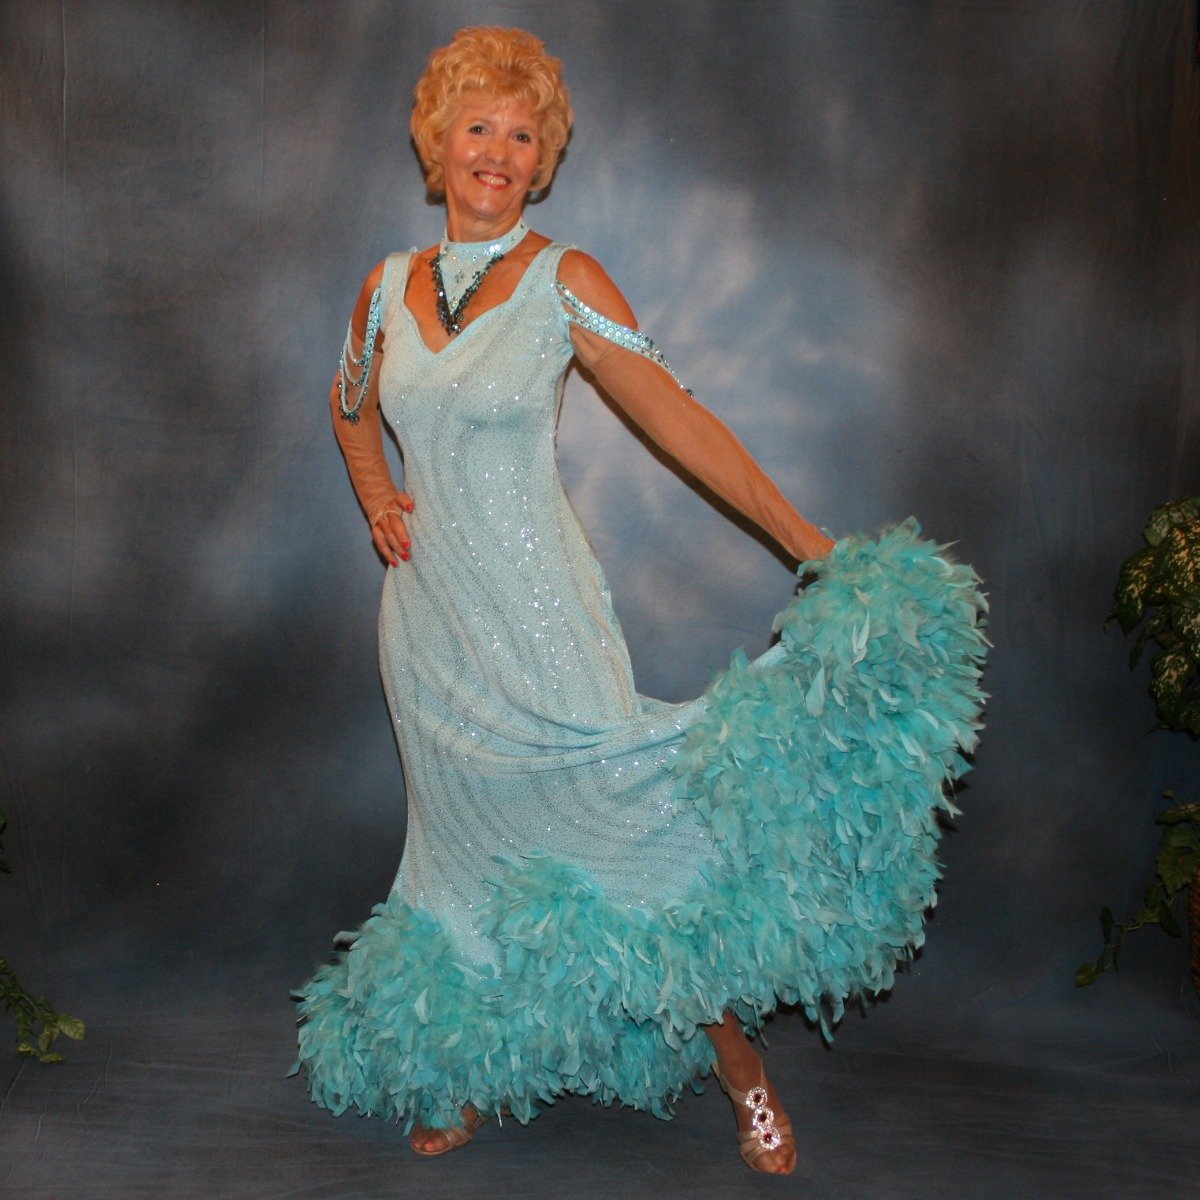 Soft blue ballroom dress with chandelle feathers was created of a gorgeous glitter slinky with a wave pattern, has strap detailing on the low back, embellished with Swarovski rhinestones & hand beading on the arm draping straps & matching neck piece.